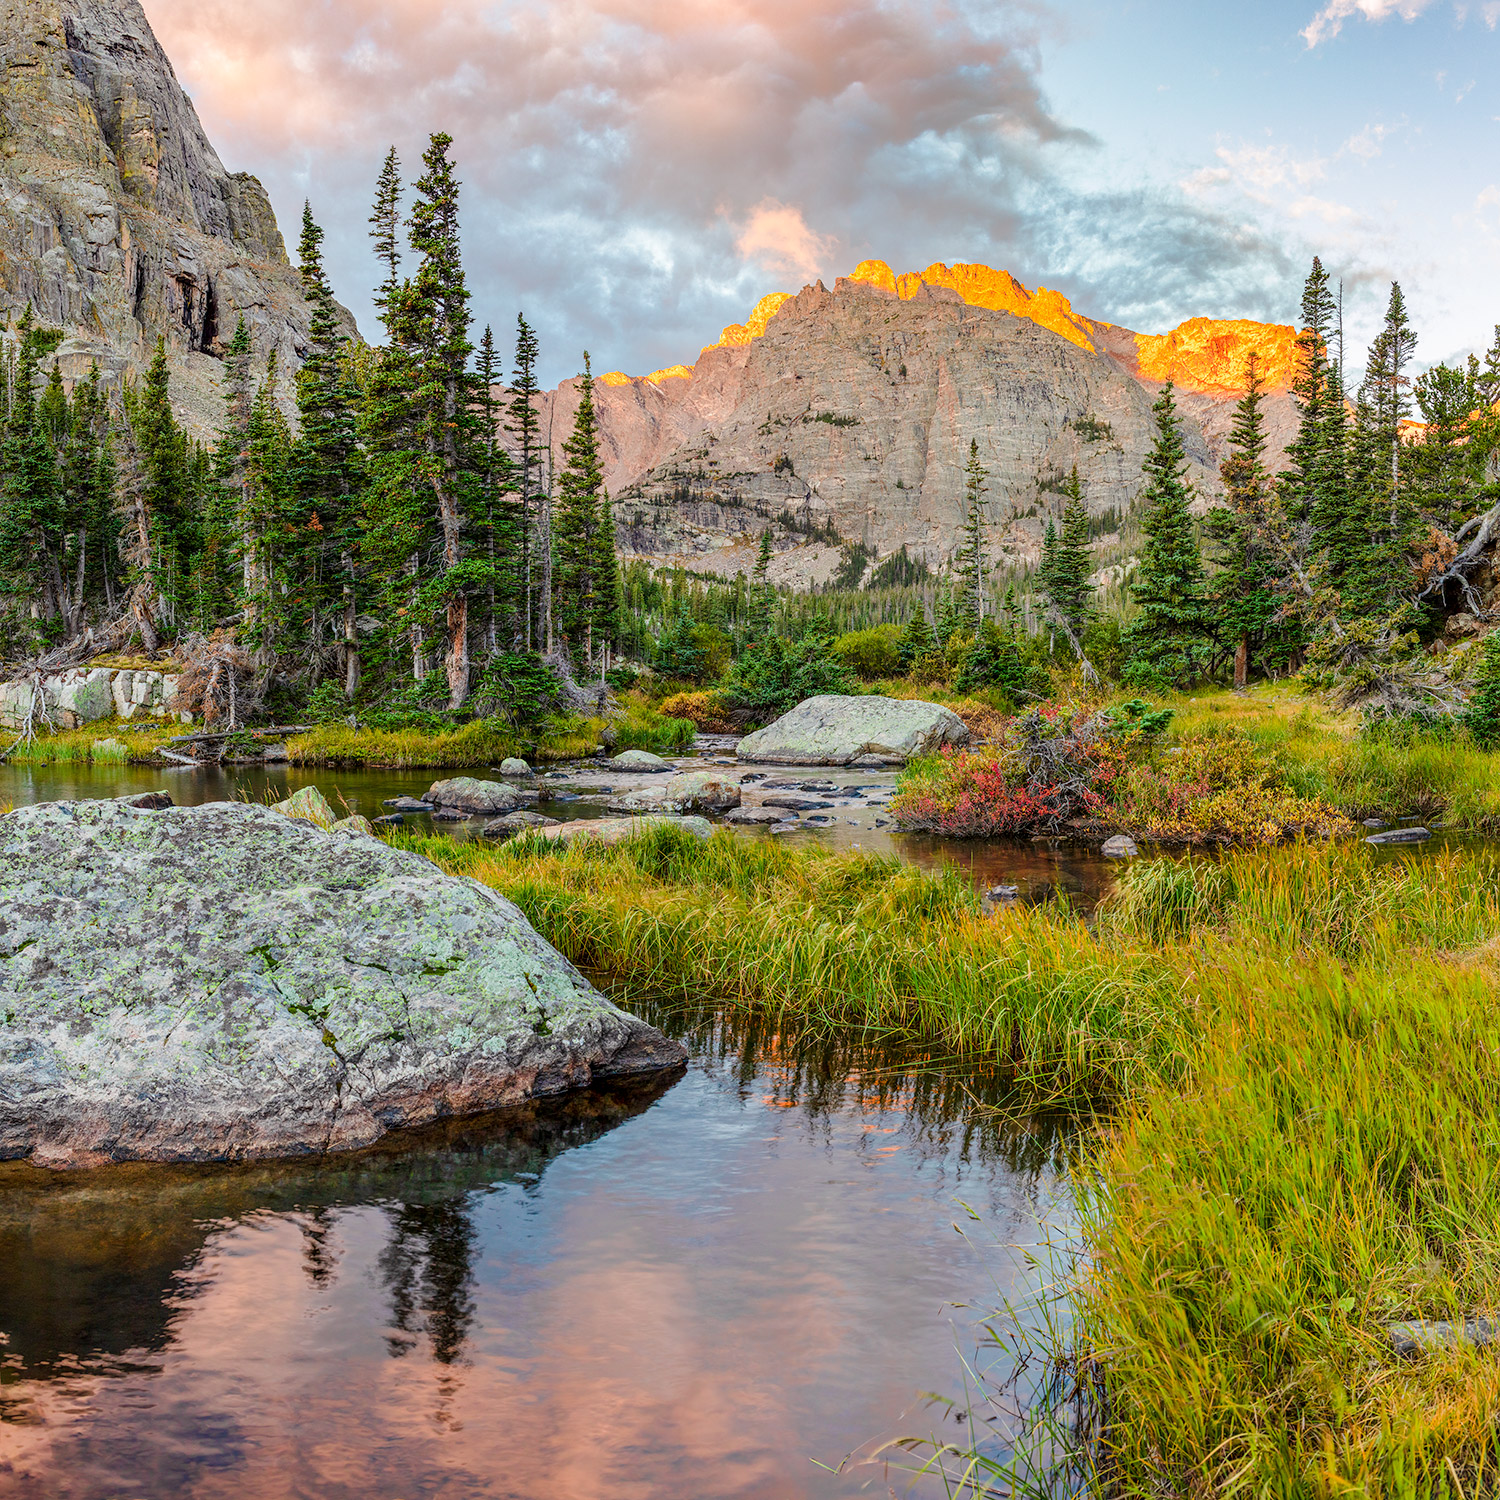 Rocky Mountain National Park isn't usually known for its fall splendor. However, this particular location provided just enough...